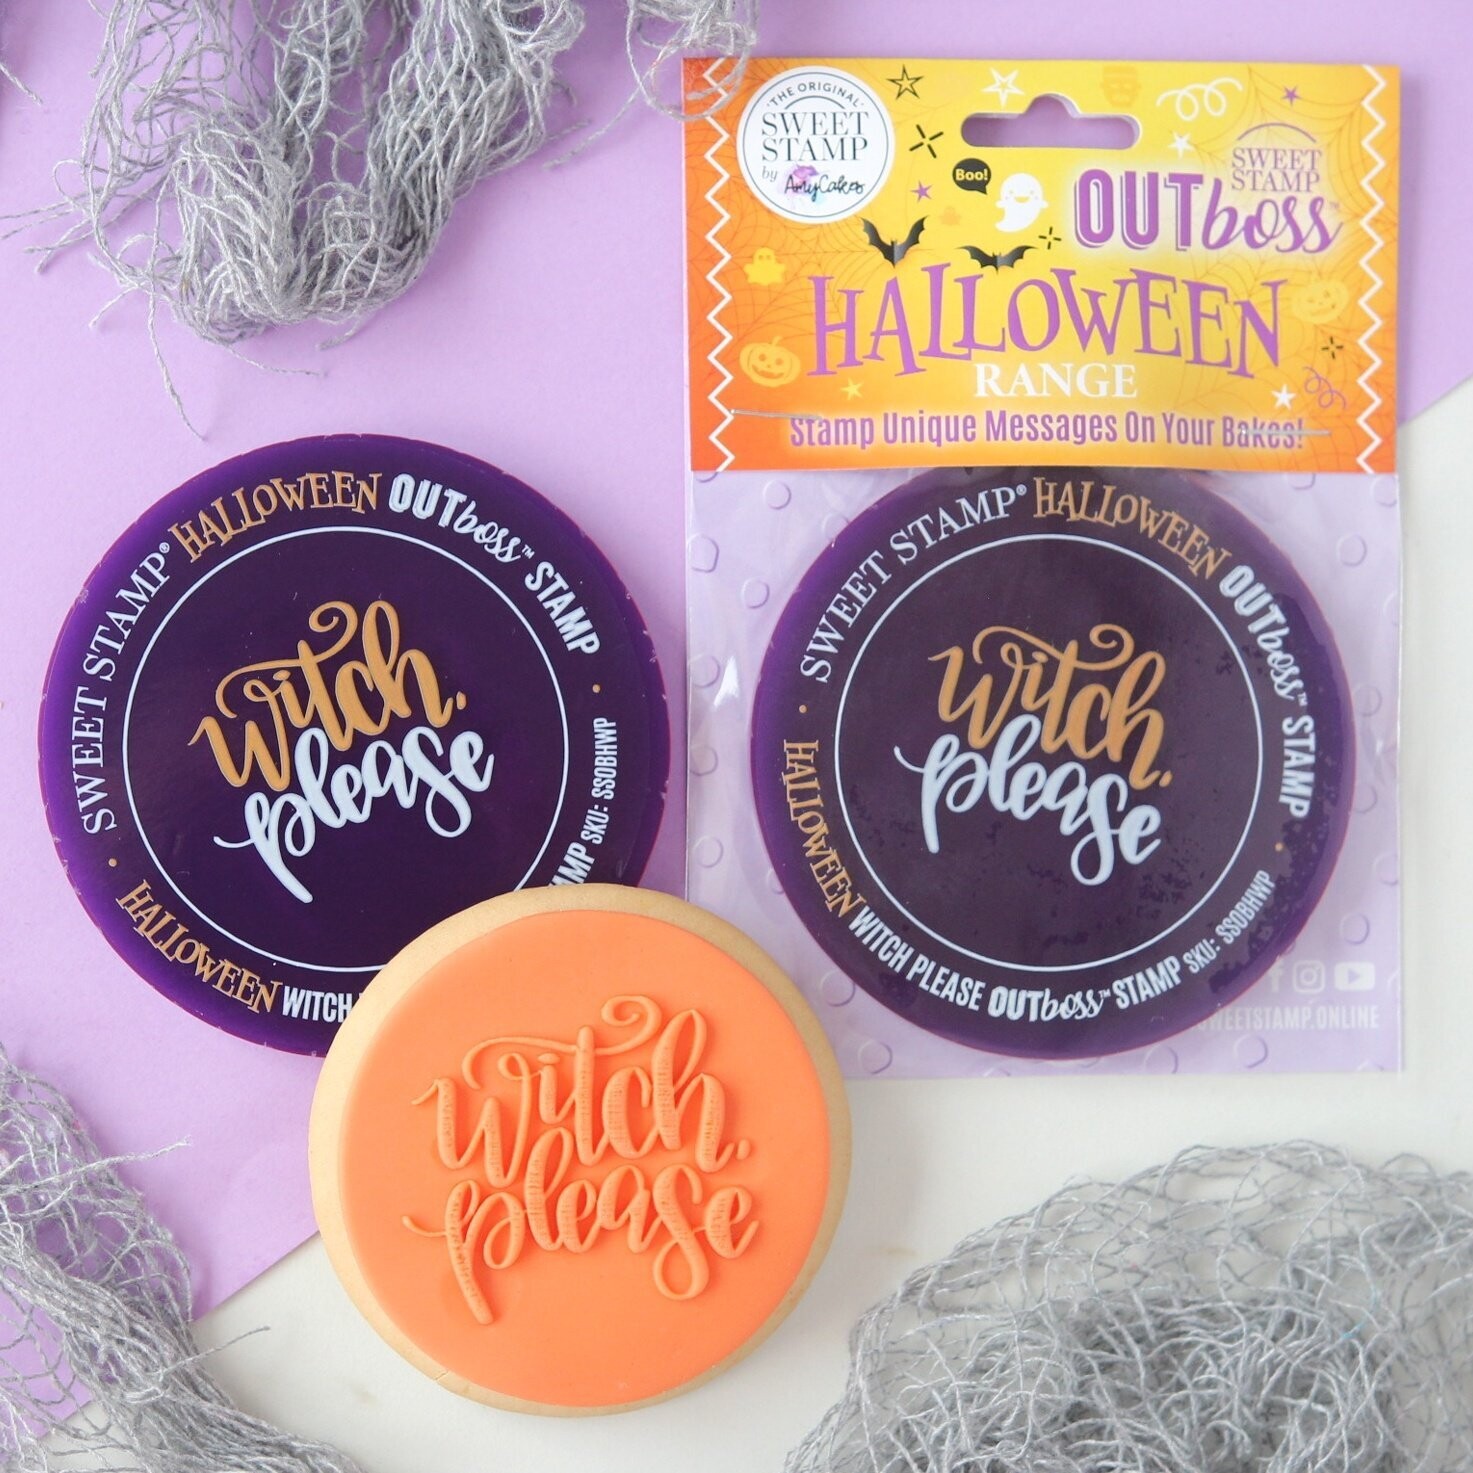 Sweet Stamp -OUTboss Halloween -WITCH, PLEASE - Σφραγίδα Halloween WITCH, PLEASE